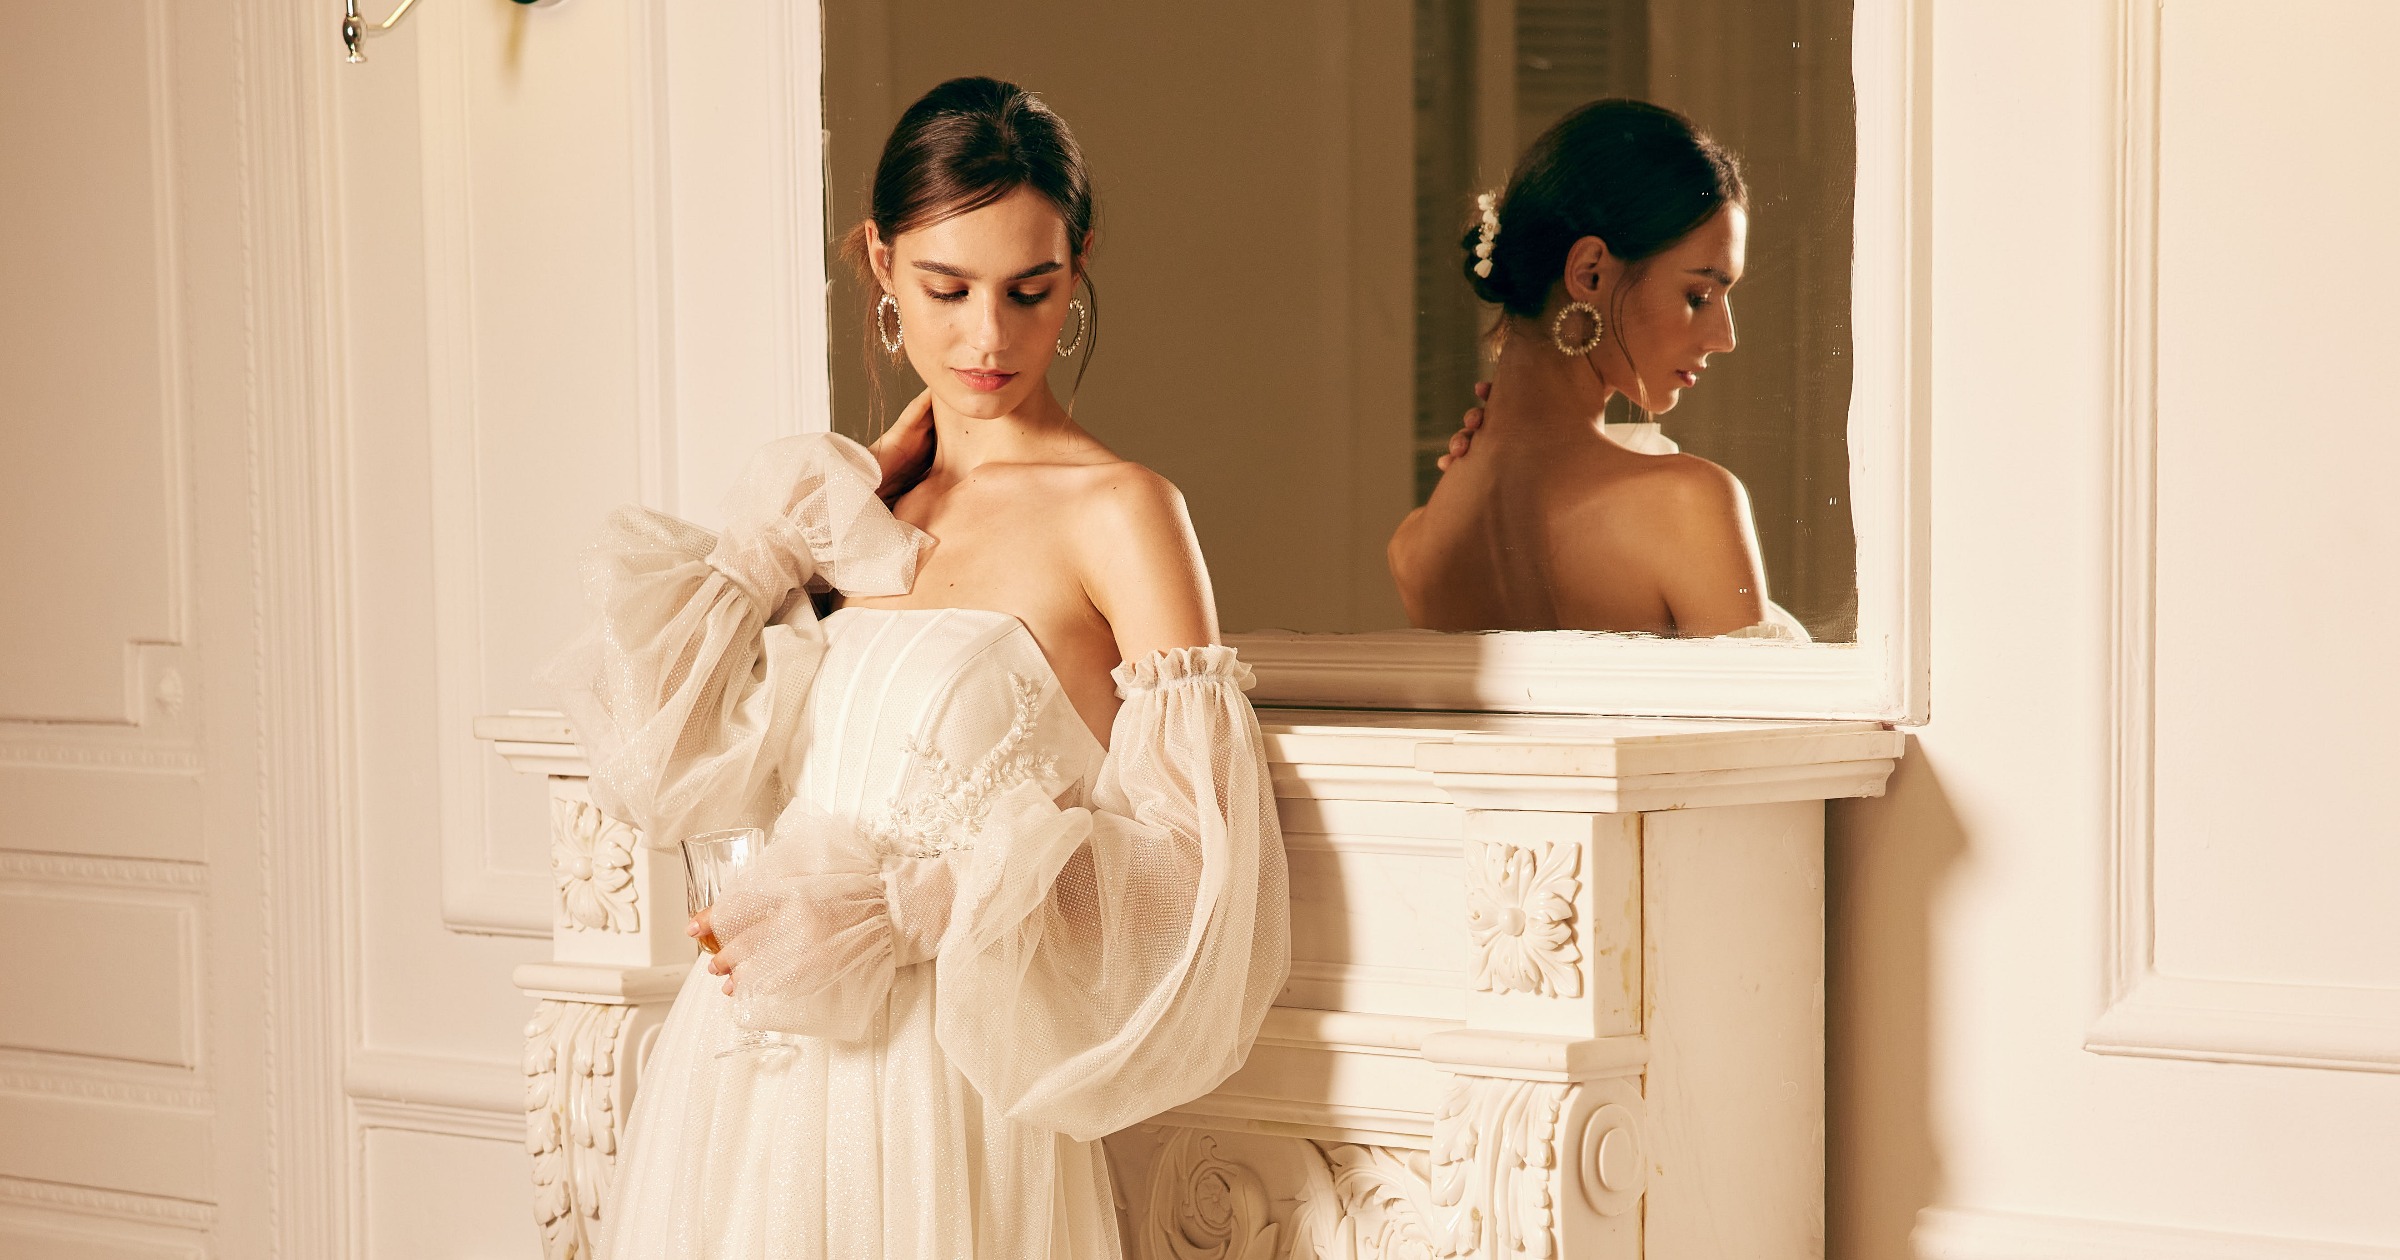 AW Bridal’s Latest Collection Is Straight Out Of A Fairytale